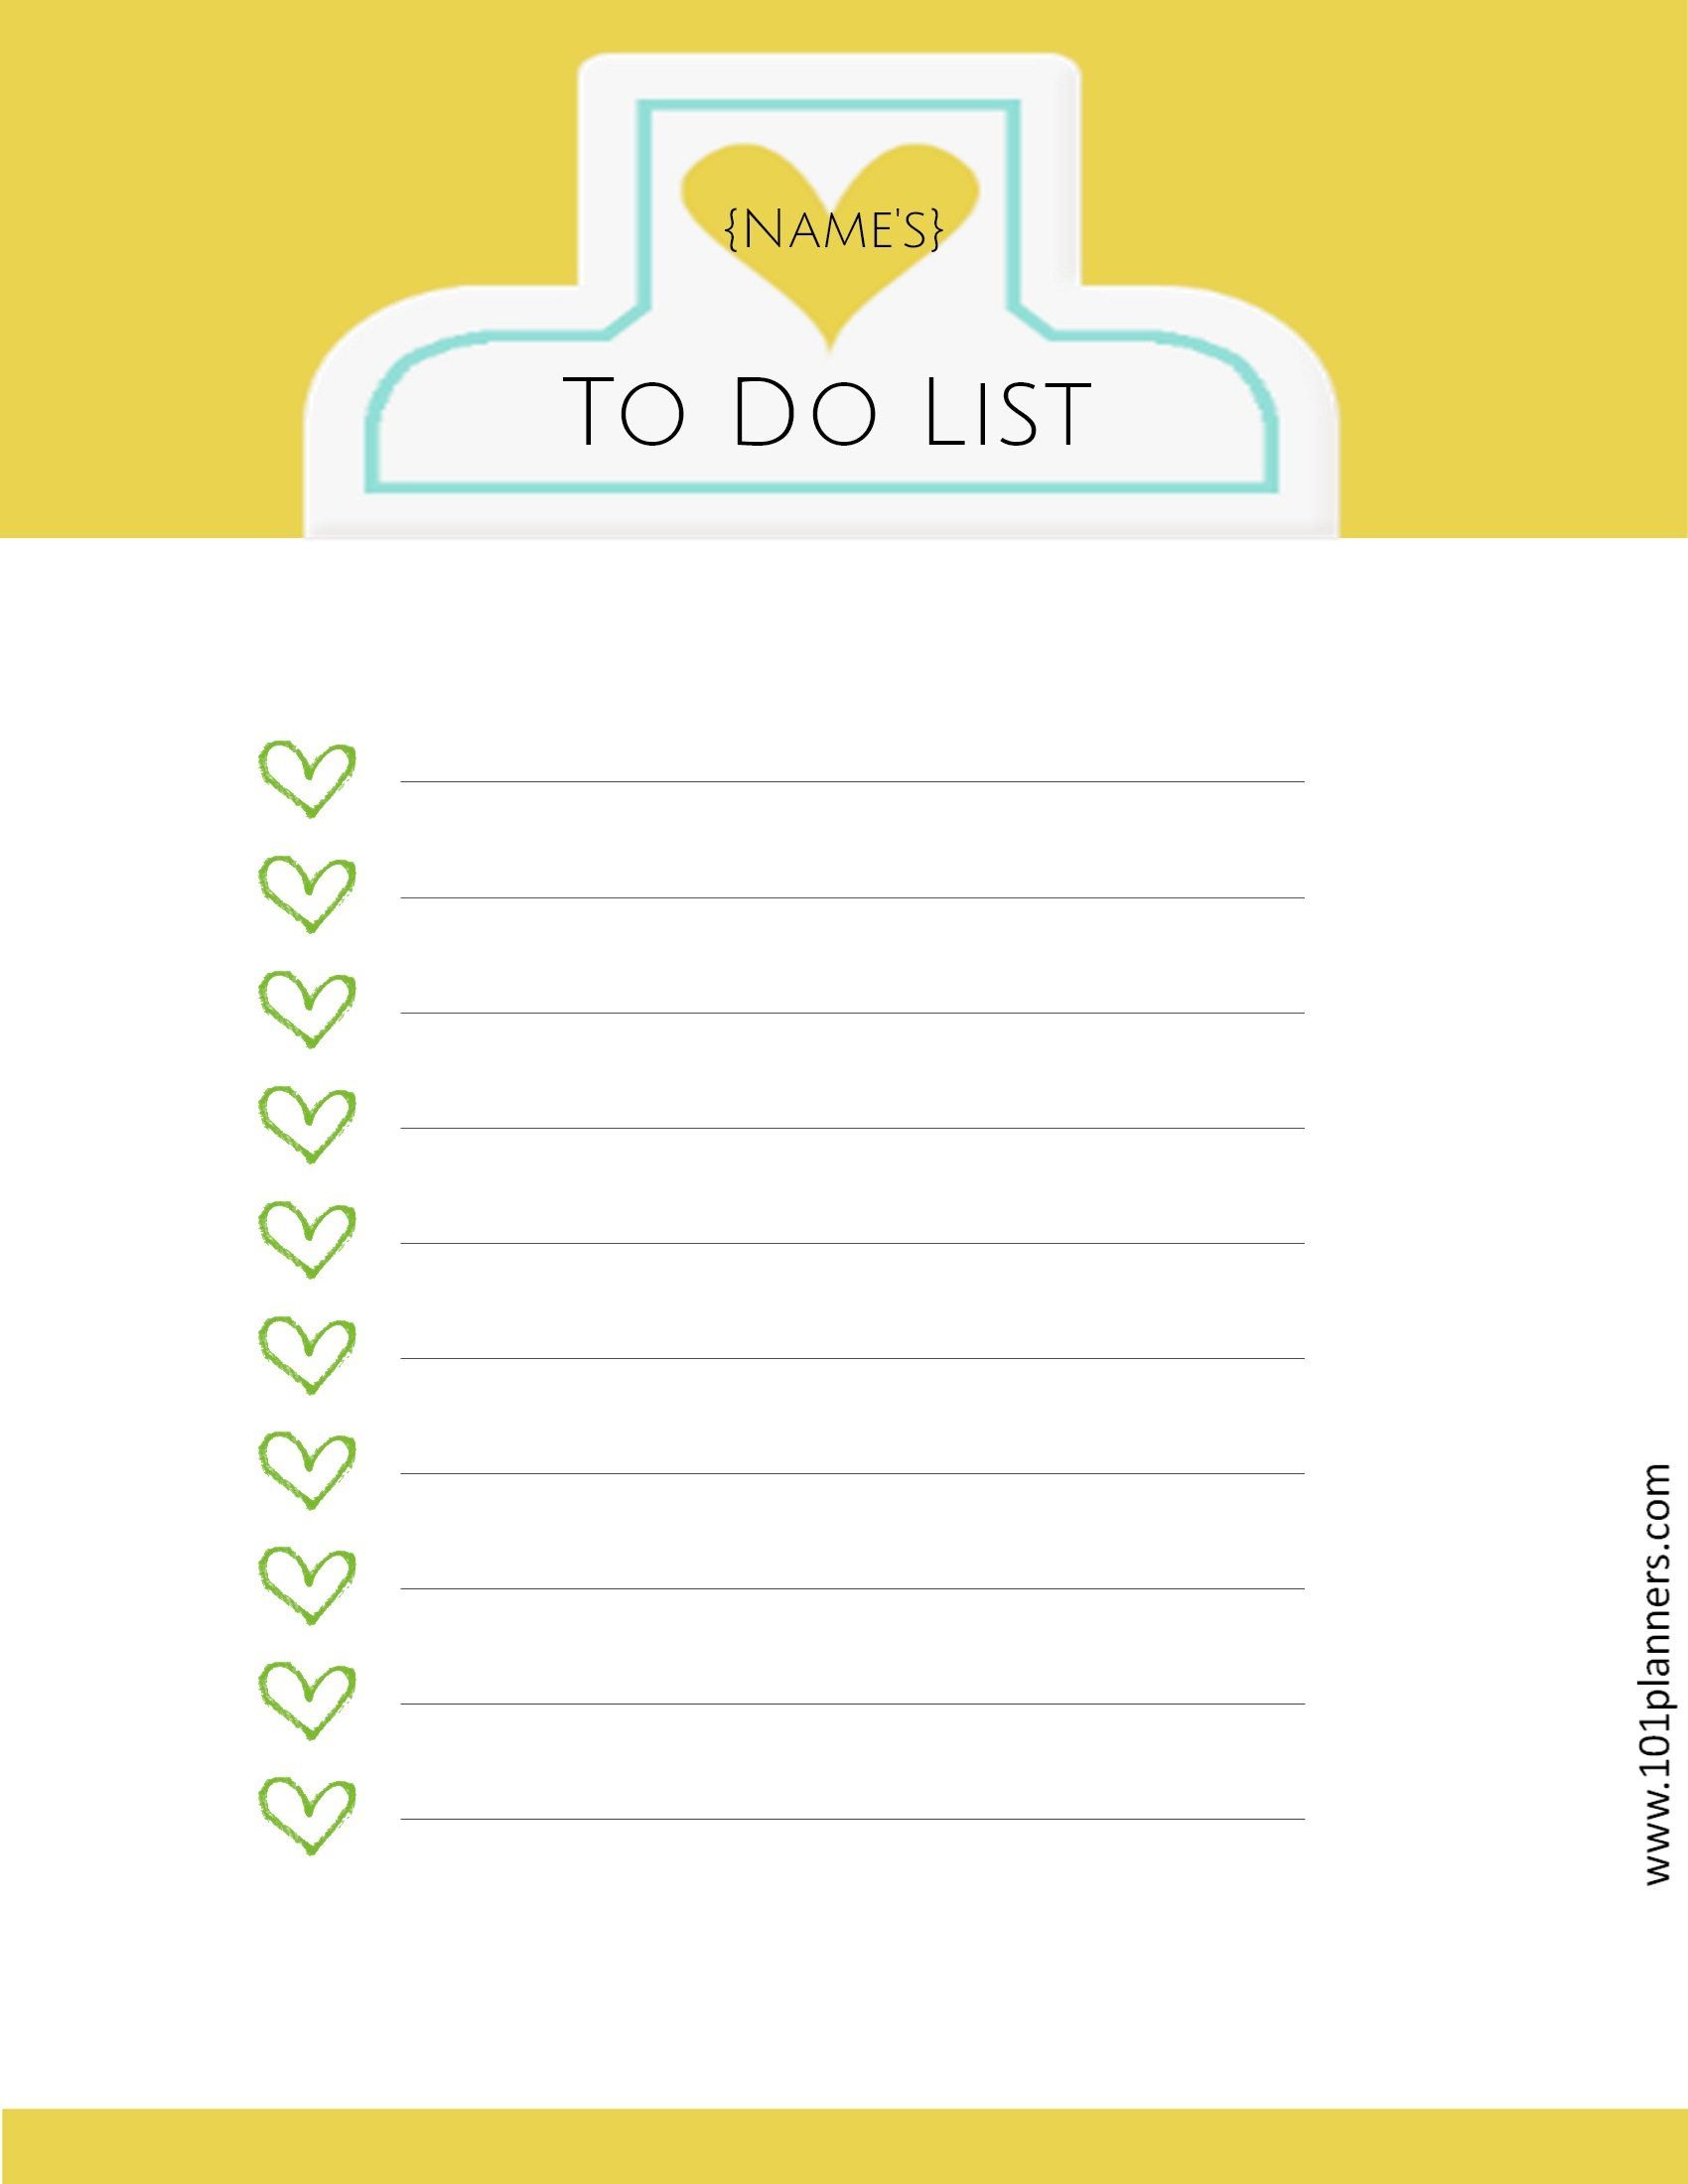 FREE Printable To Do List Template | Print or Use Online | To do lists